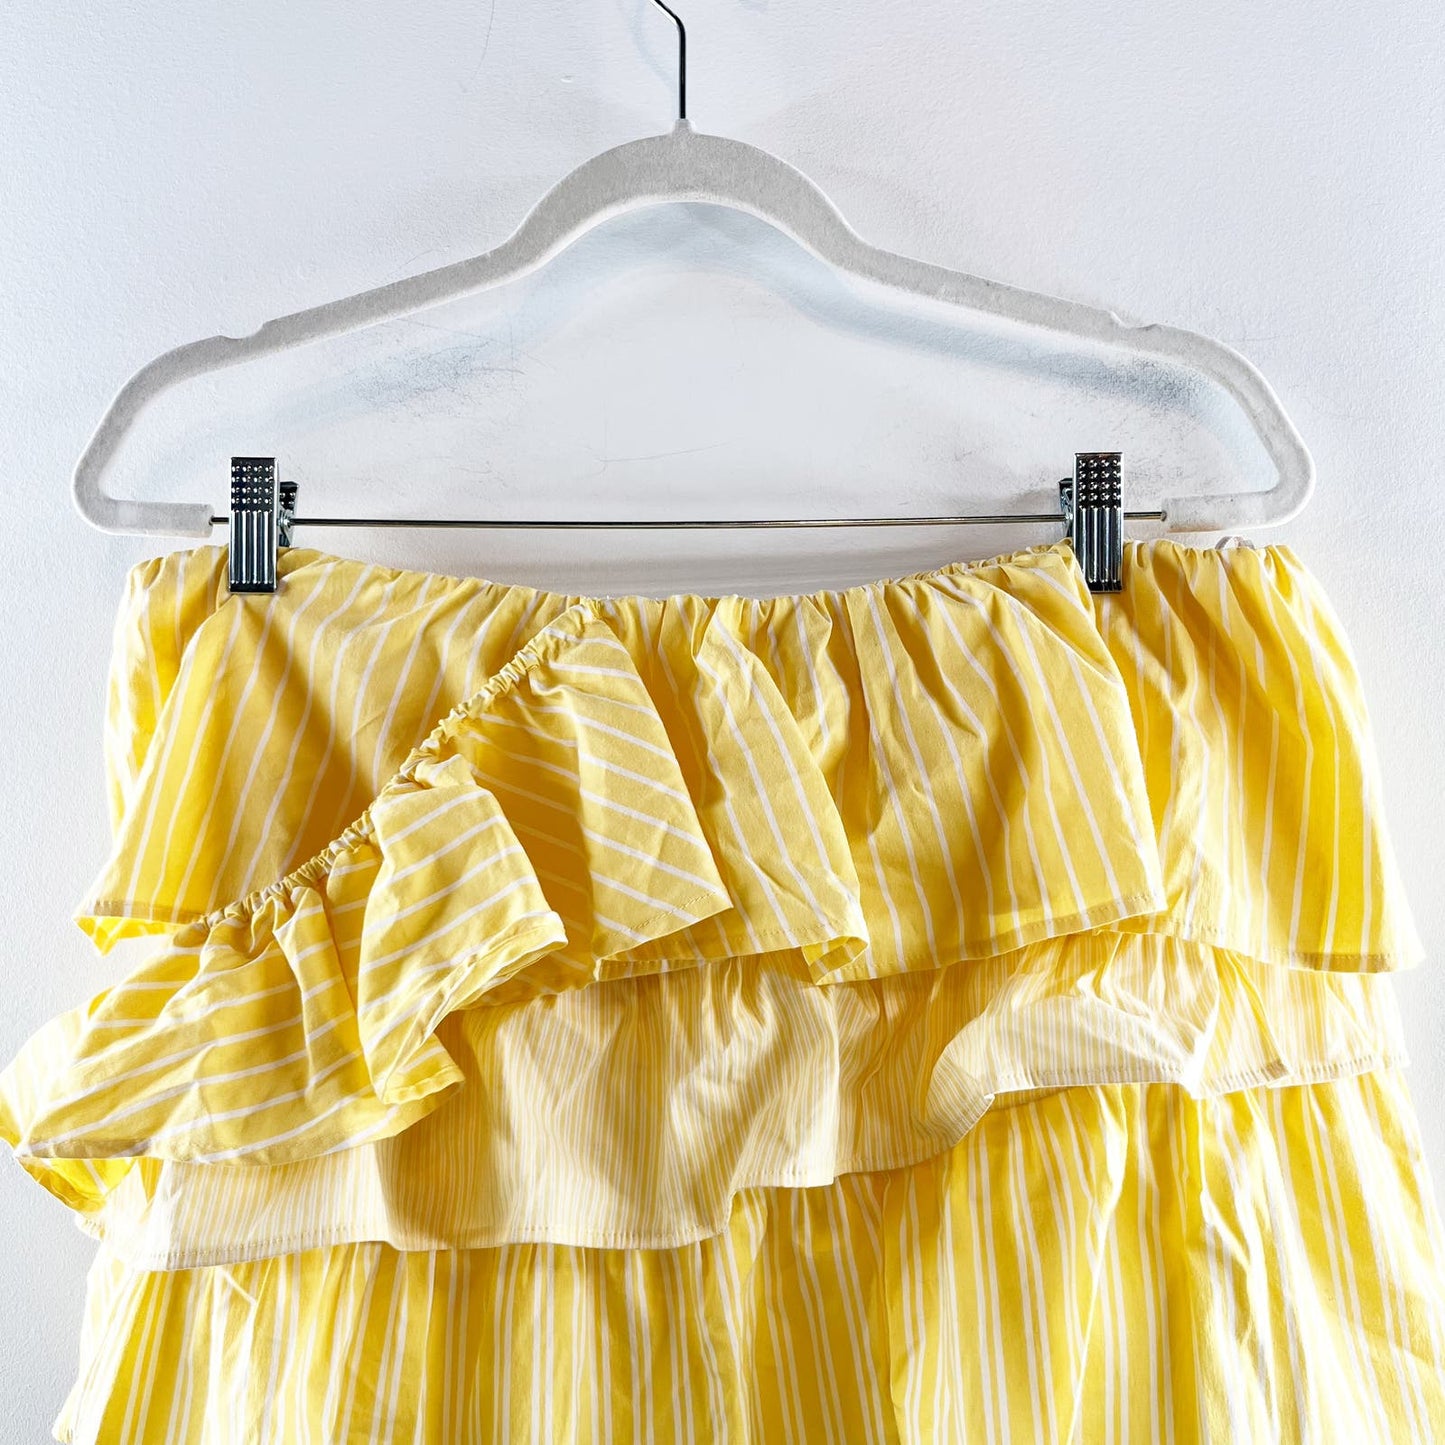 Maeve Anthropologie Striped Ruffle One Shoulder Crop Top Tank Yellow XL